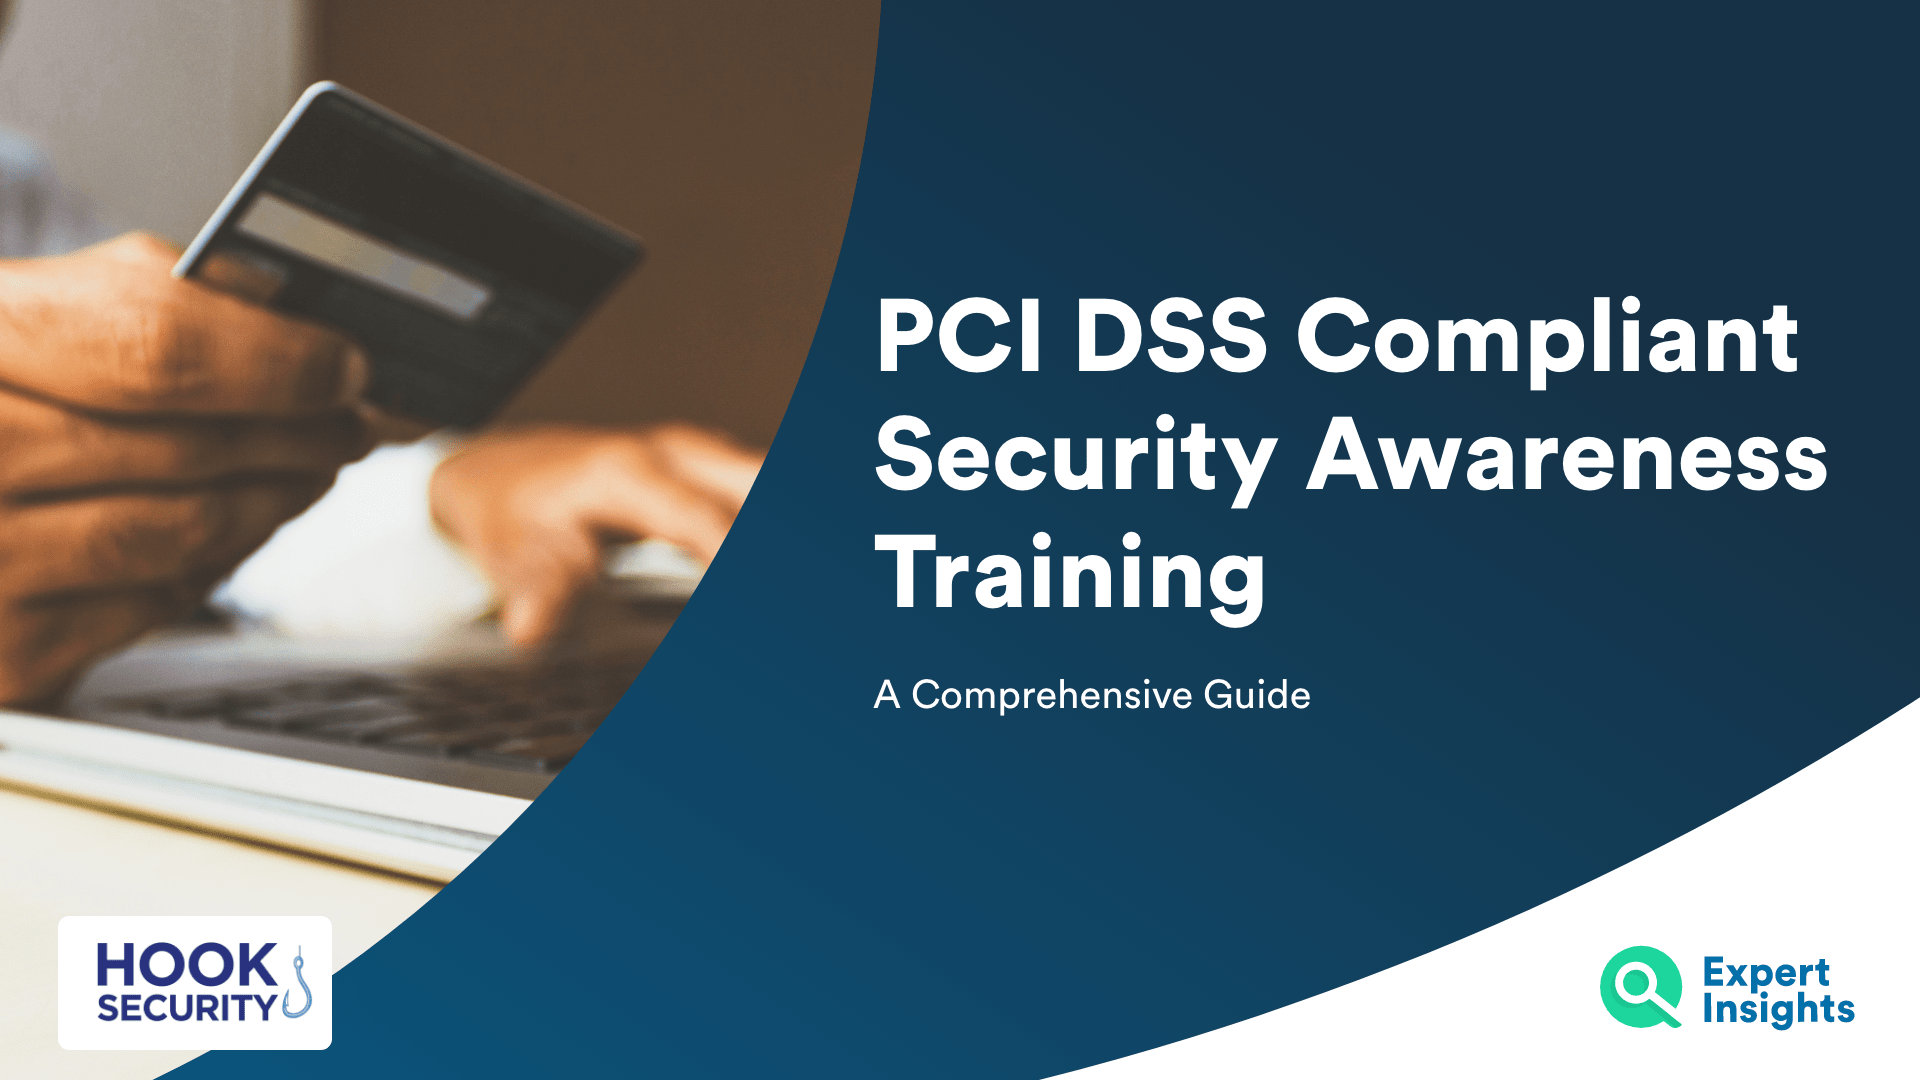 PCI DSS Compliant Security Awareness Training: A Comprehensive Guide